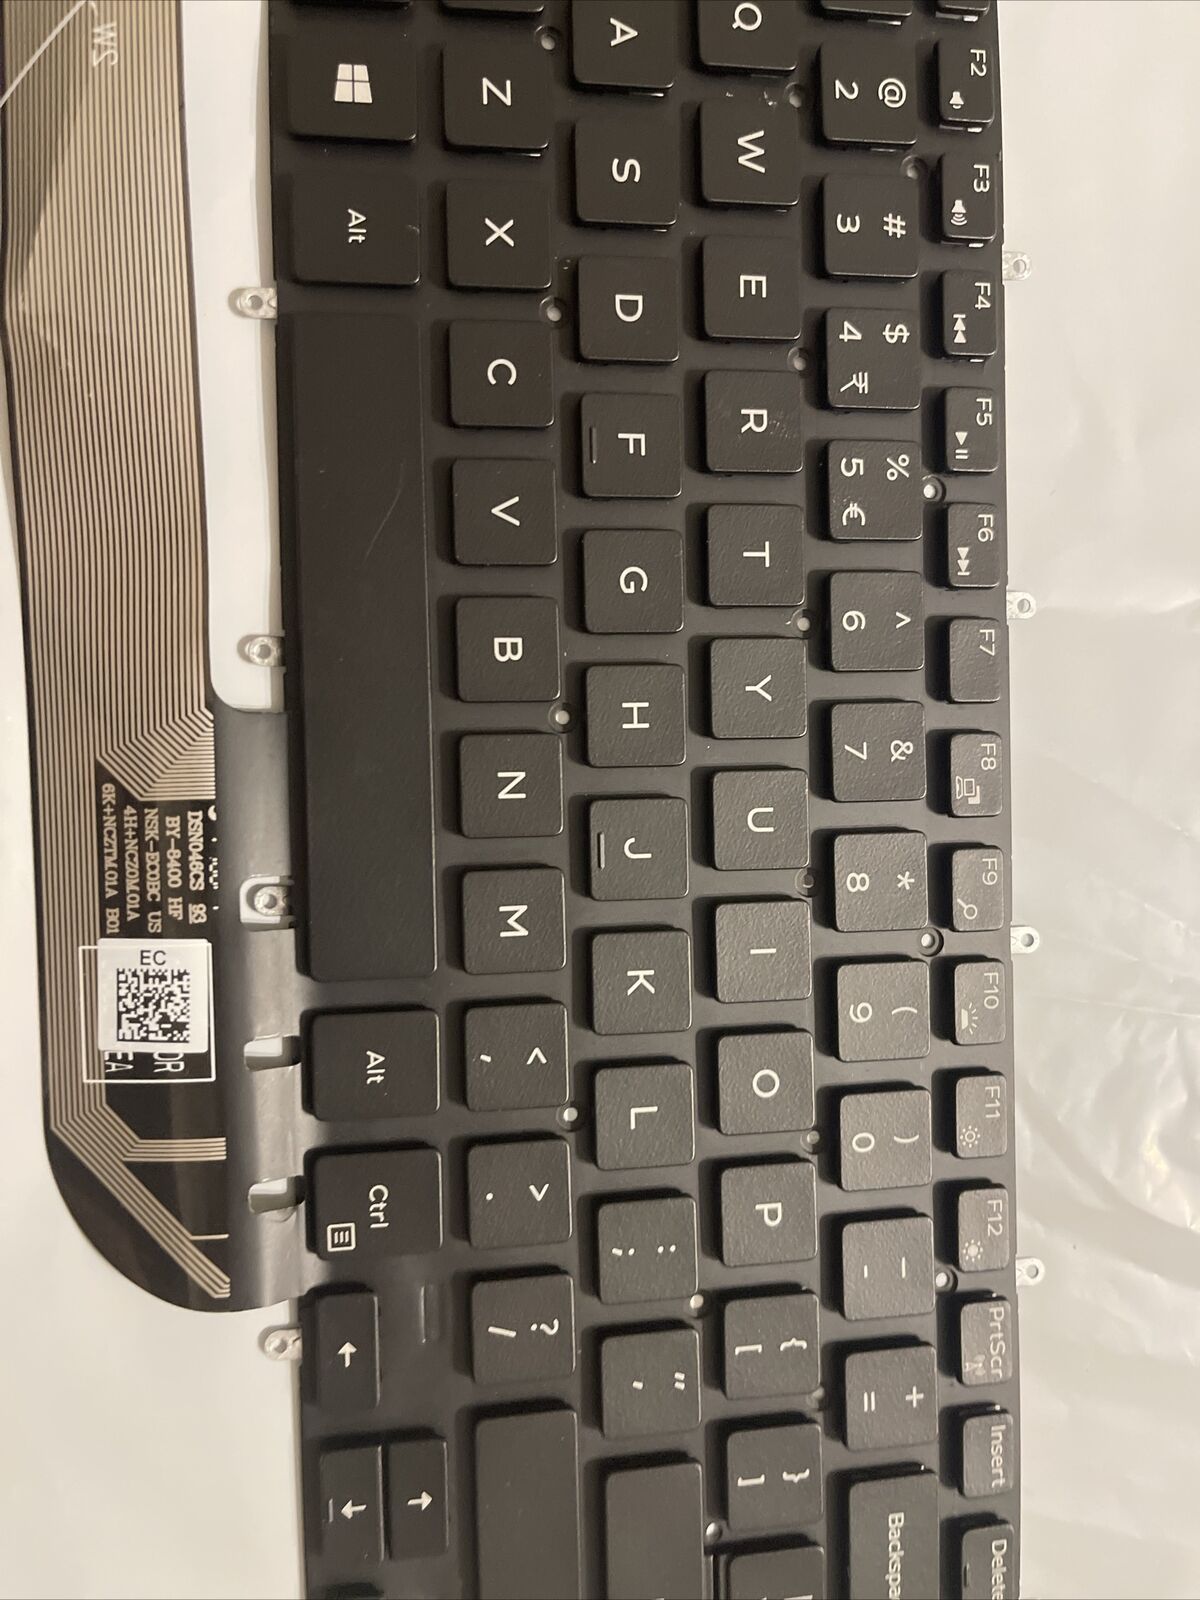 Genuine Dell OEM Inspiron 7773 7779 7778 Laptop US Backlit Keyboard GGVTH 0GGVTH